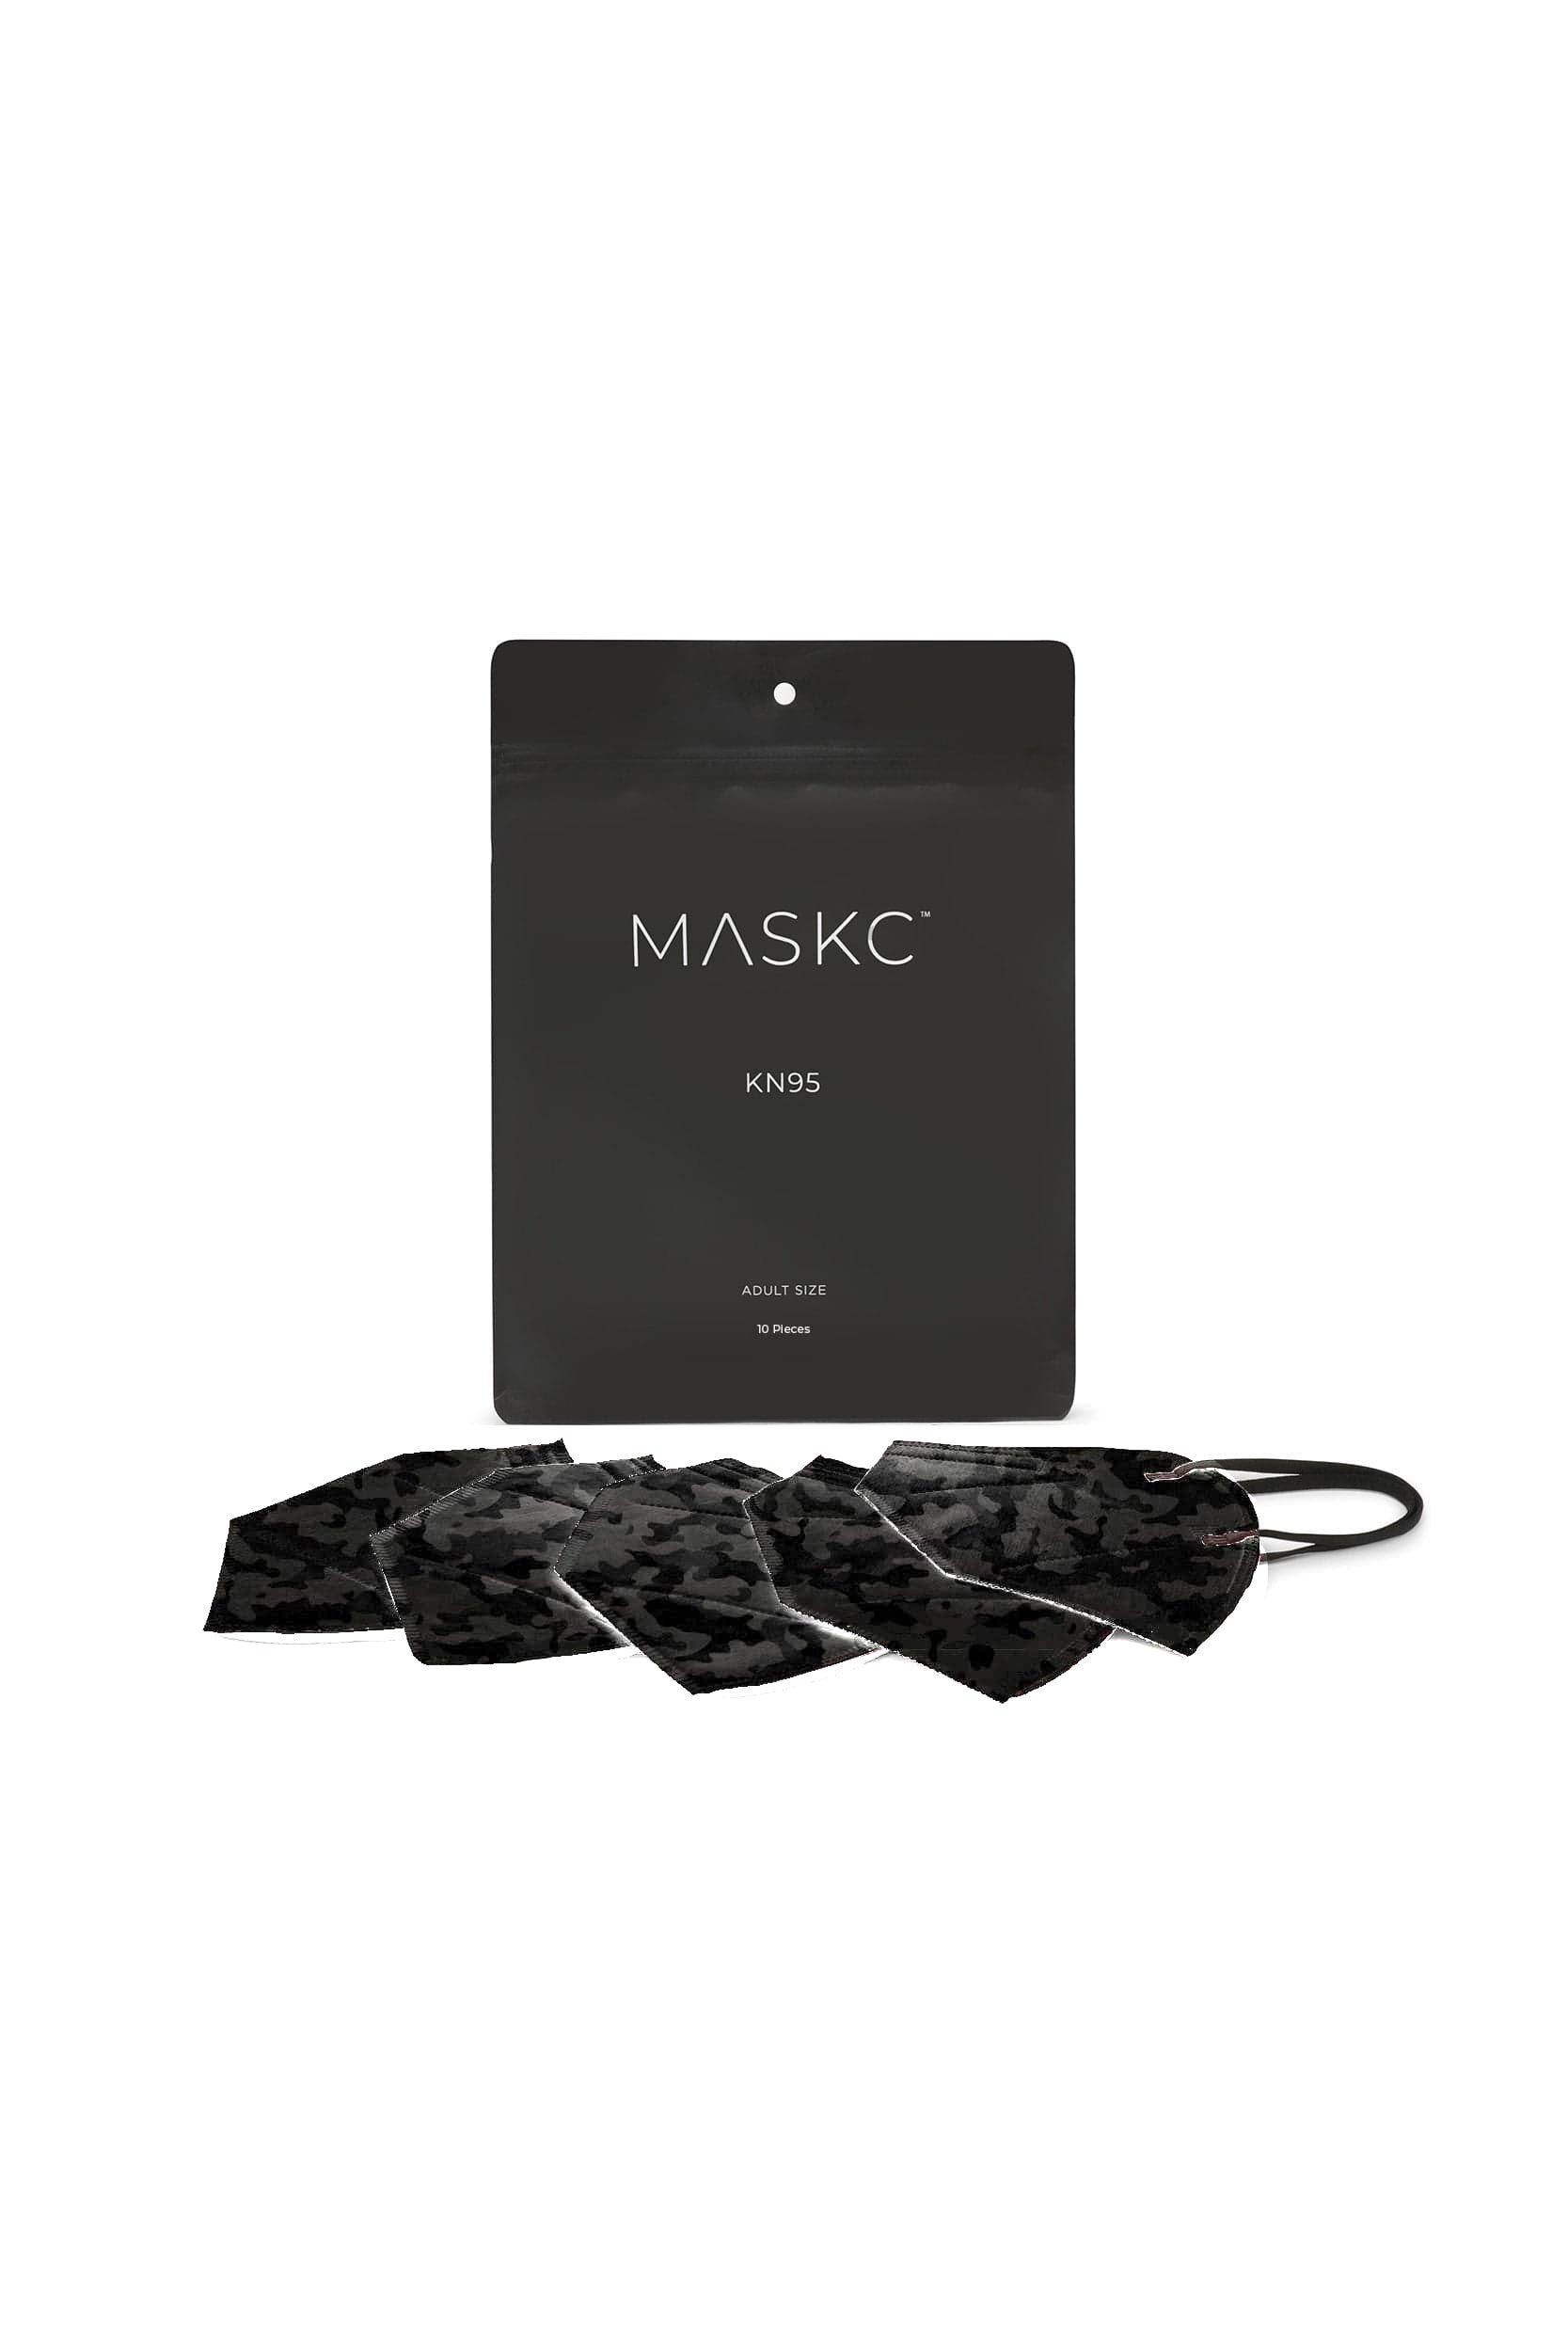 Pack of Black Camo Printed KN95 face masks. Each pack contains stylish high quality face masks.